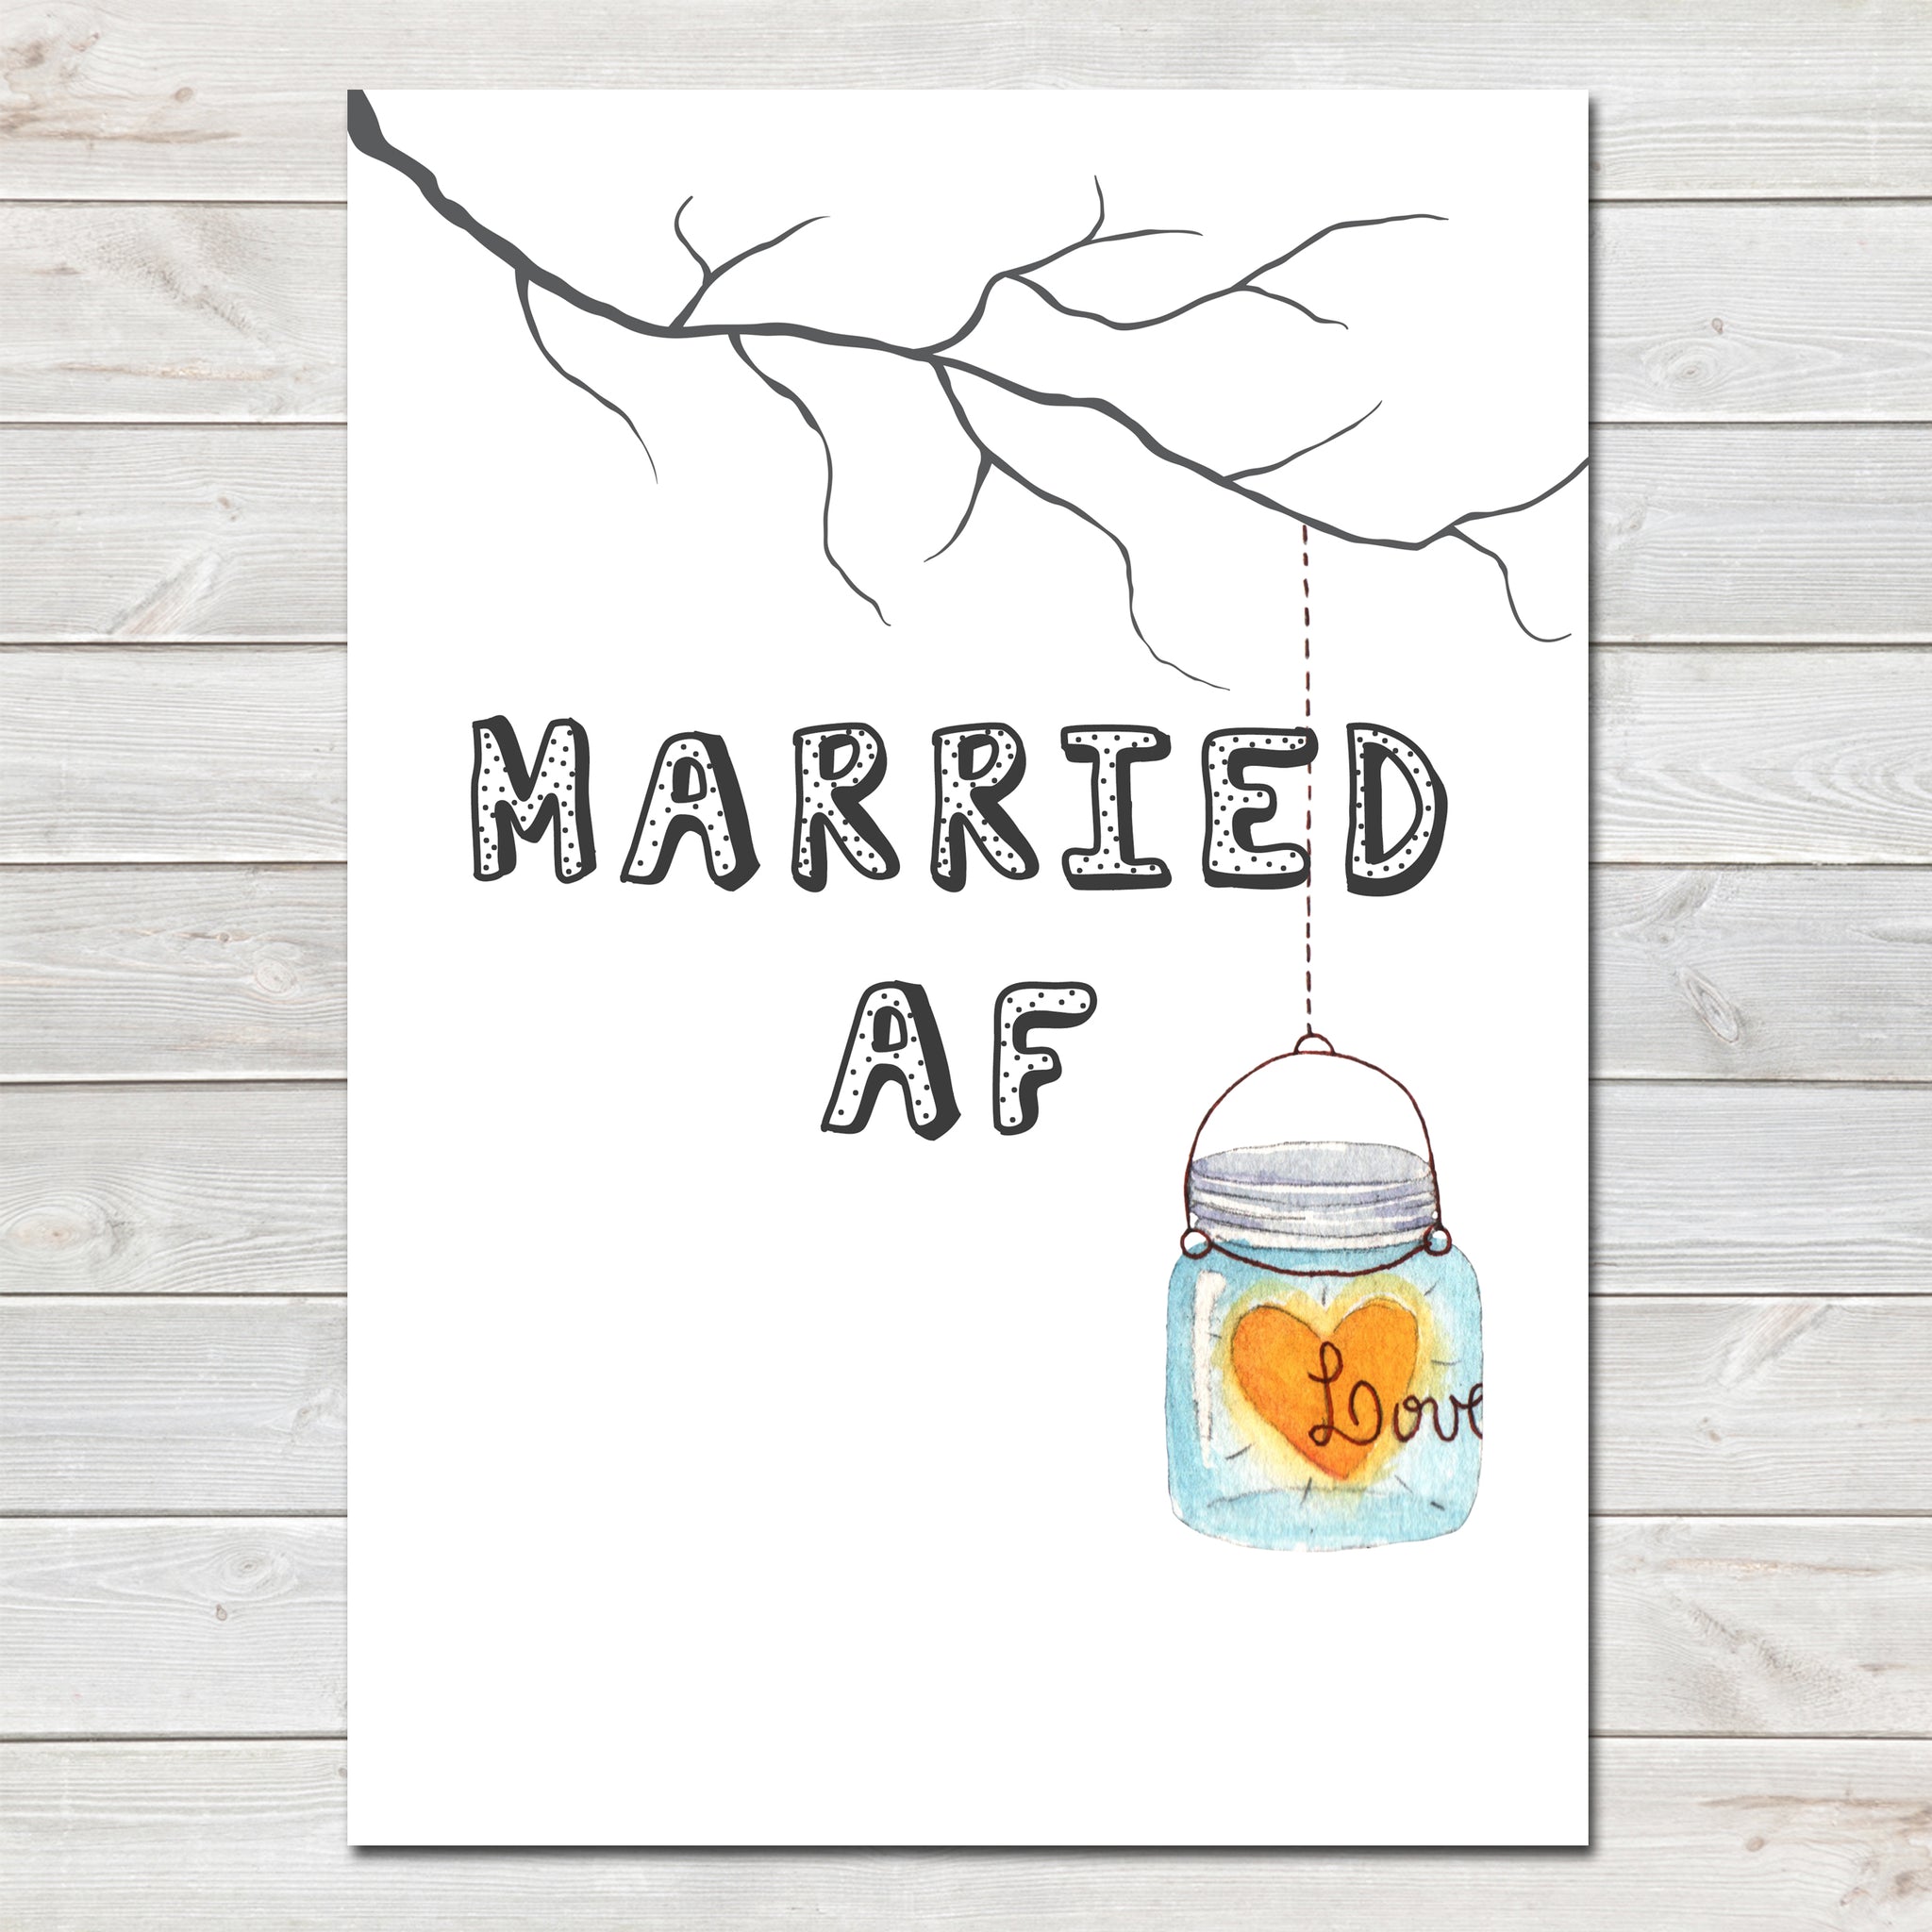 Wedding Party Married AF (As F***) Mason Jar, Funny Tree Poster / Photo Prop / Sign